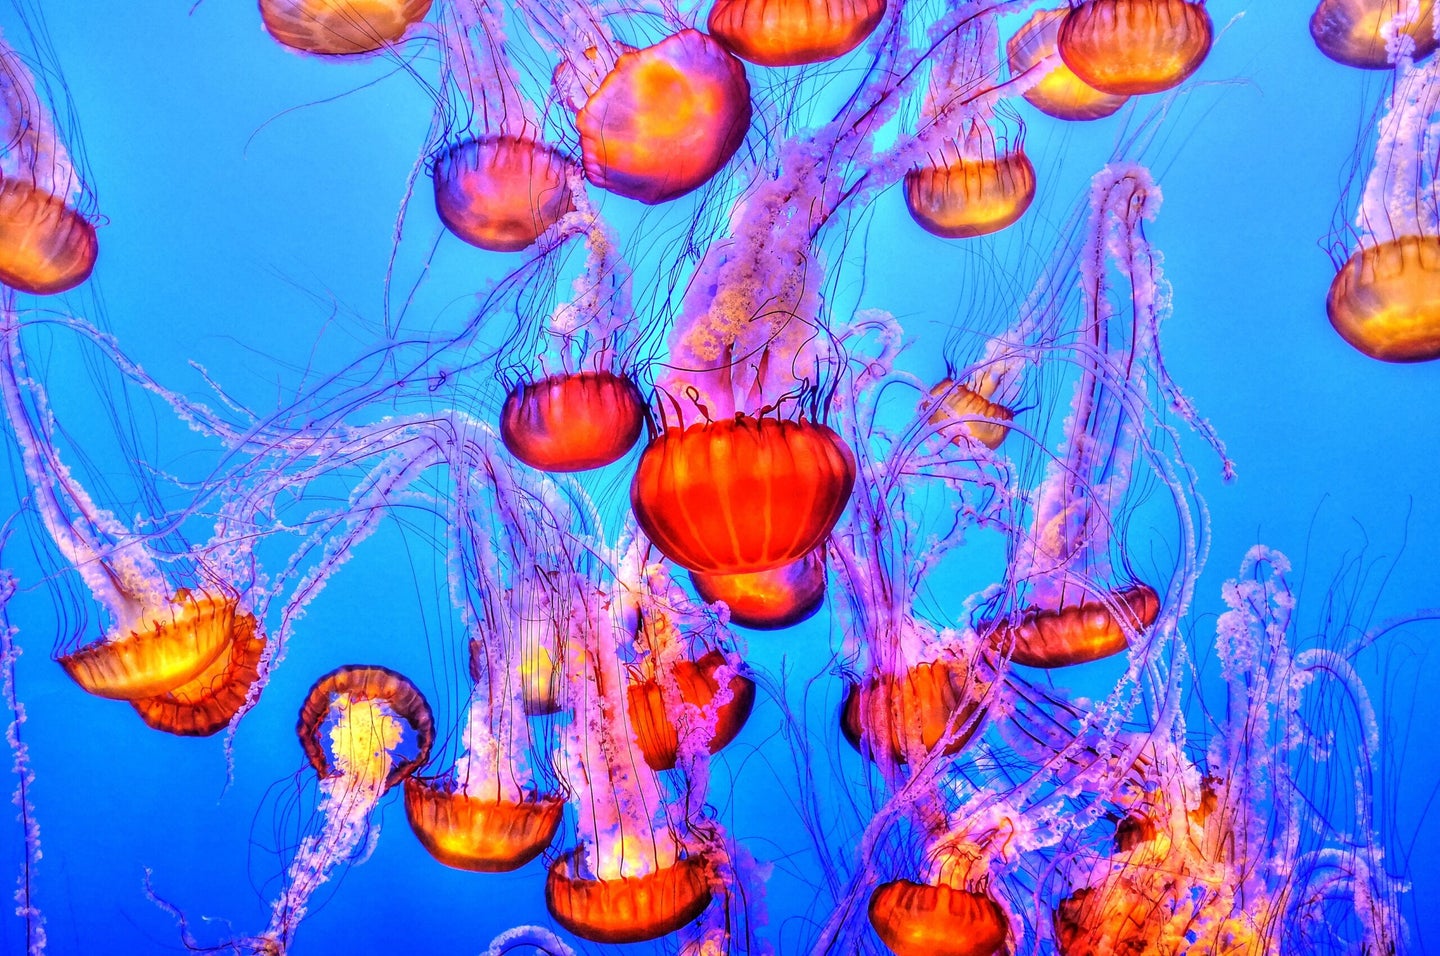 A large group of red and orange jellyfish floating in blue water.